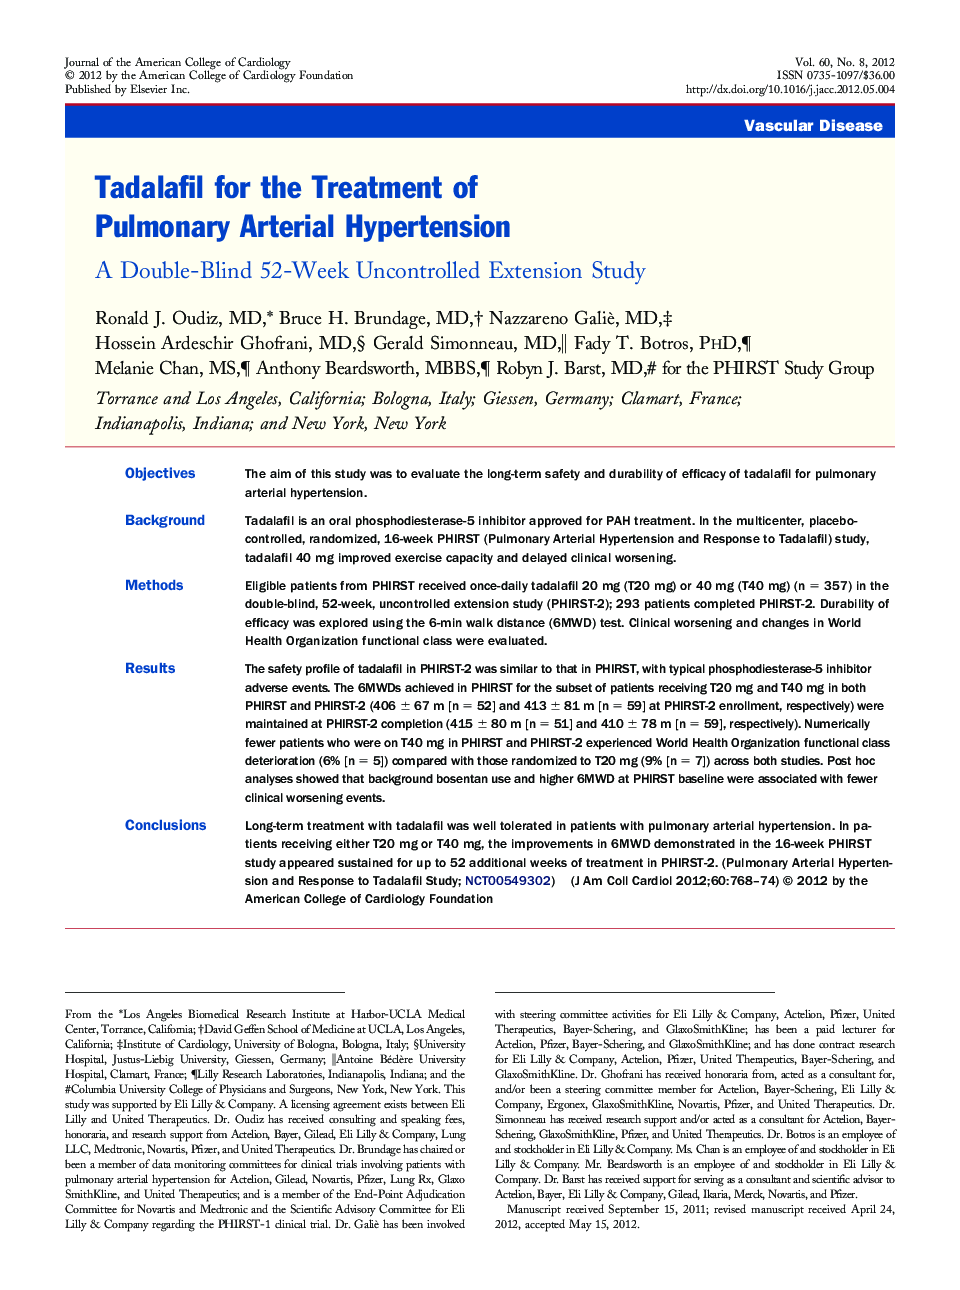 Tadalafil for the Treatment of Pulmonary Arterial Hypertension : A Double-Blind 52-Week Uncontrolled Extension Study